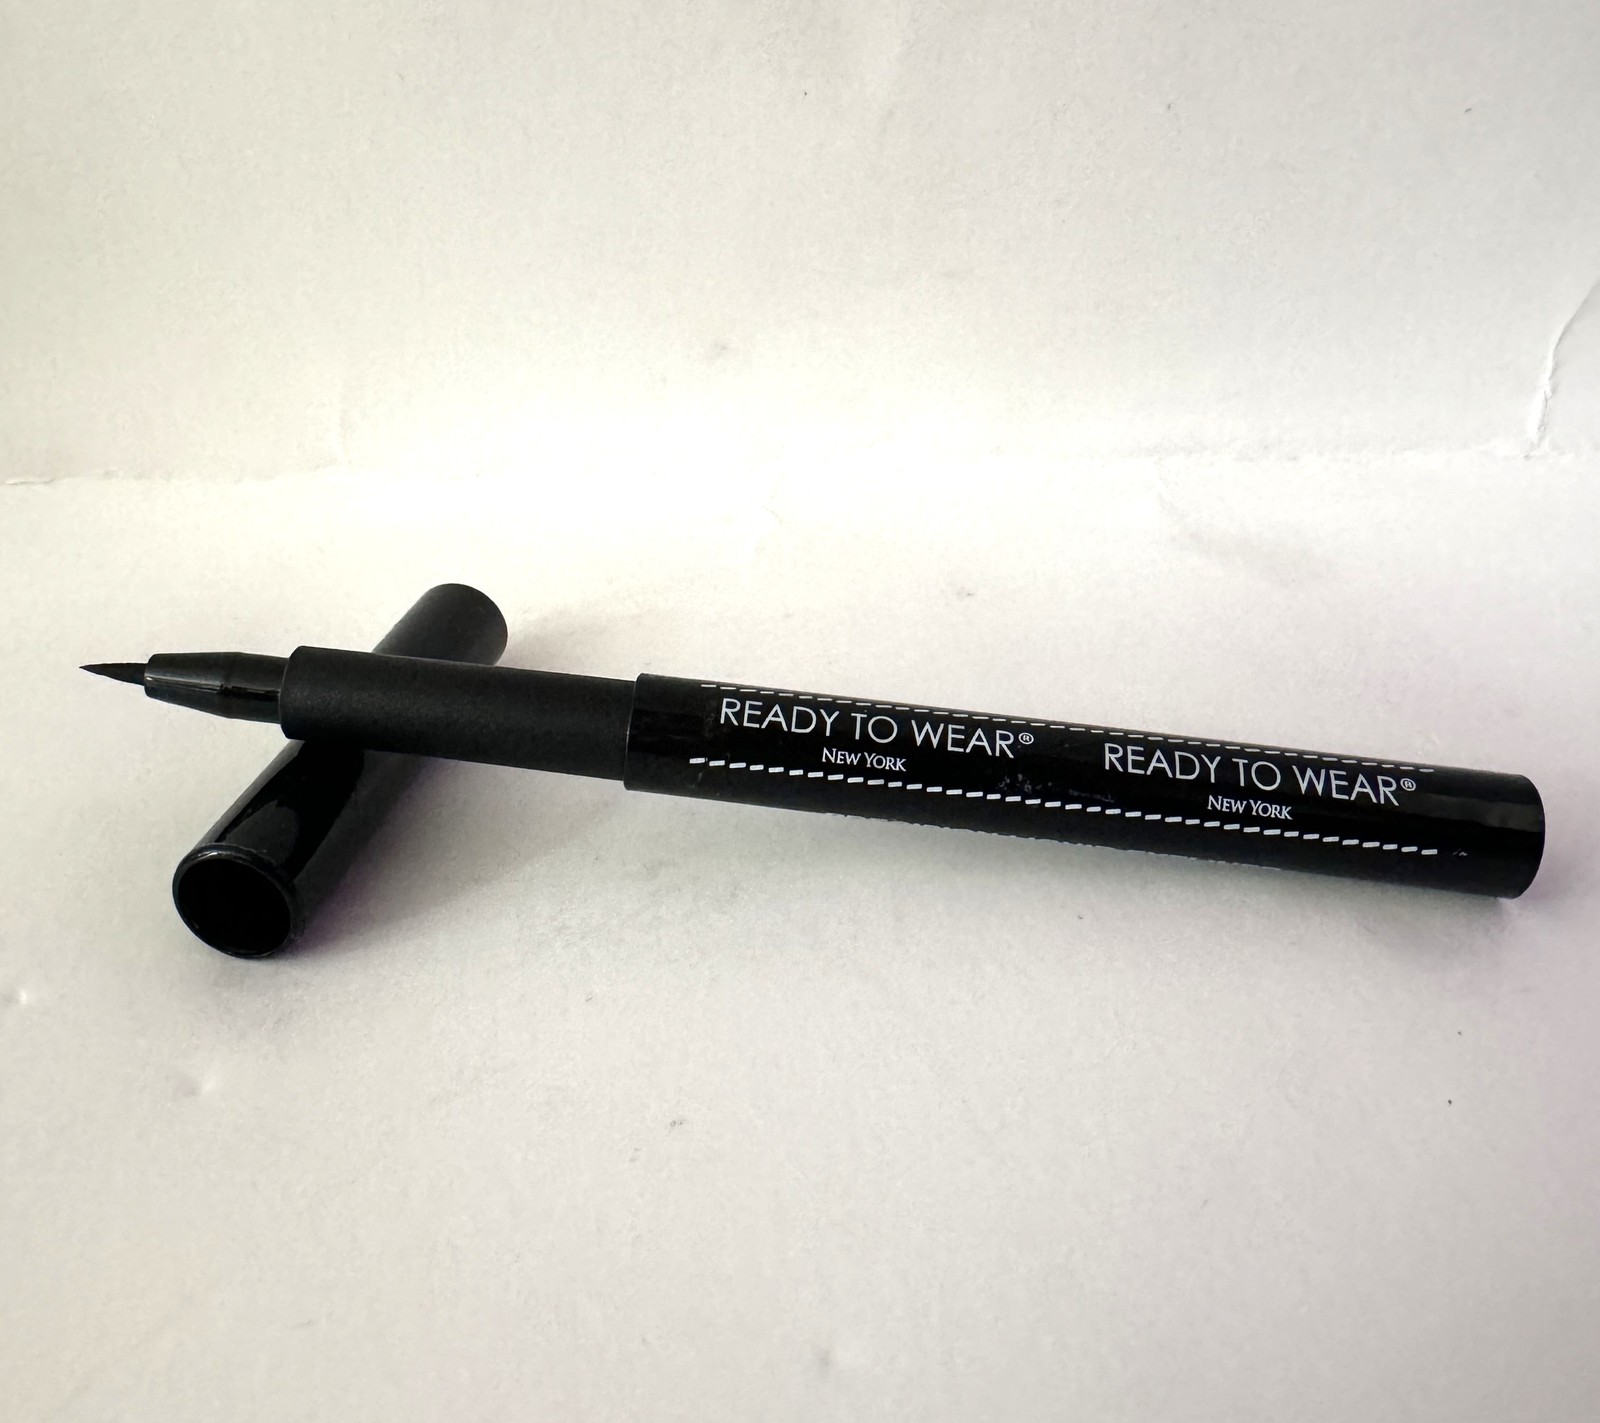 Primary image for Ready To Wear New York Precision Liquid Eyeliner 1.1ml NWOB